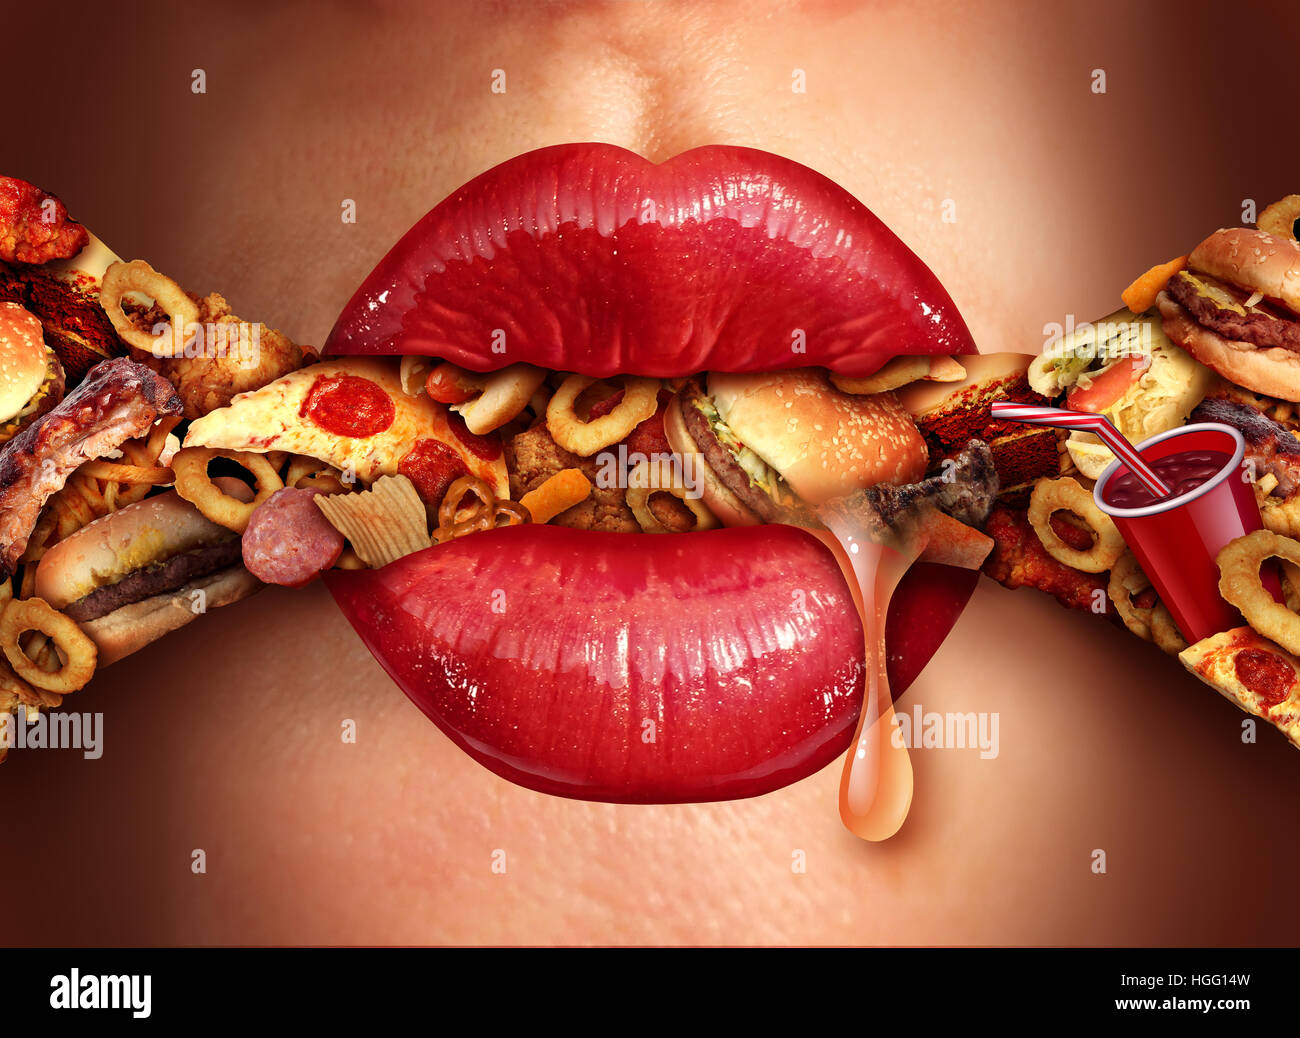 Eating addiction concept consuming junk food as a nutrition and dietary health problem concept as red lips on on an excessive huge group of unhealthy Stock Photo